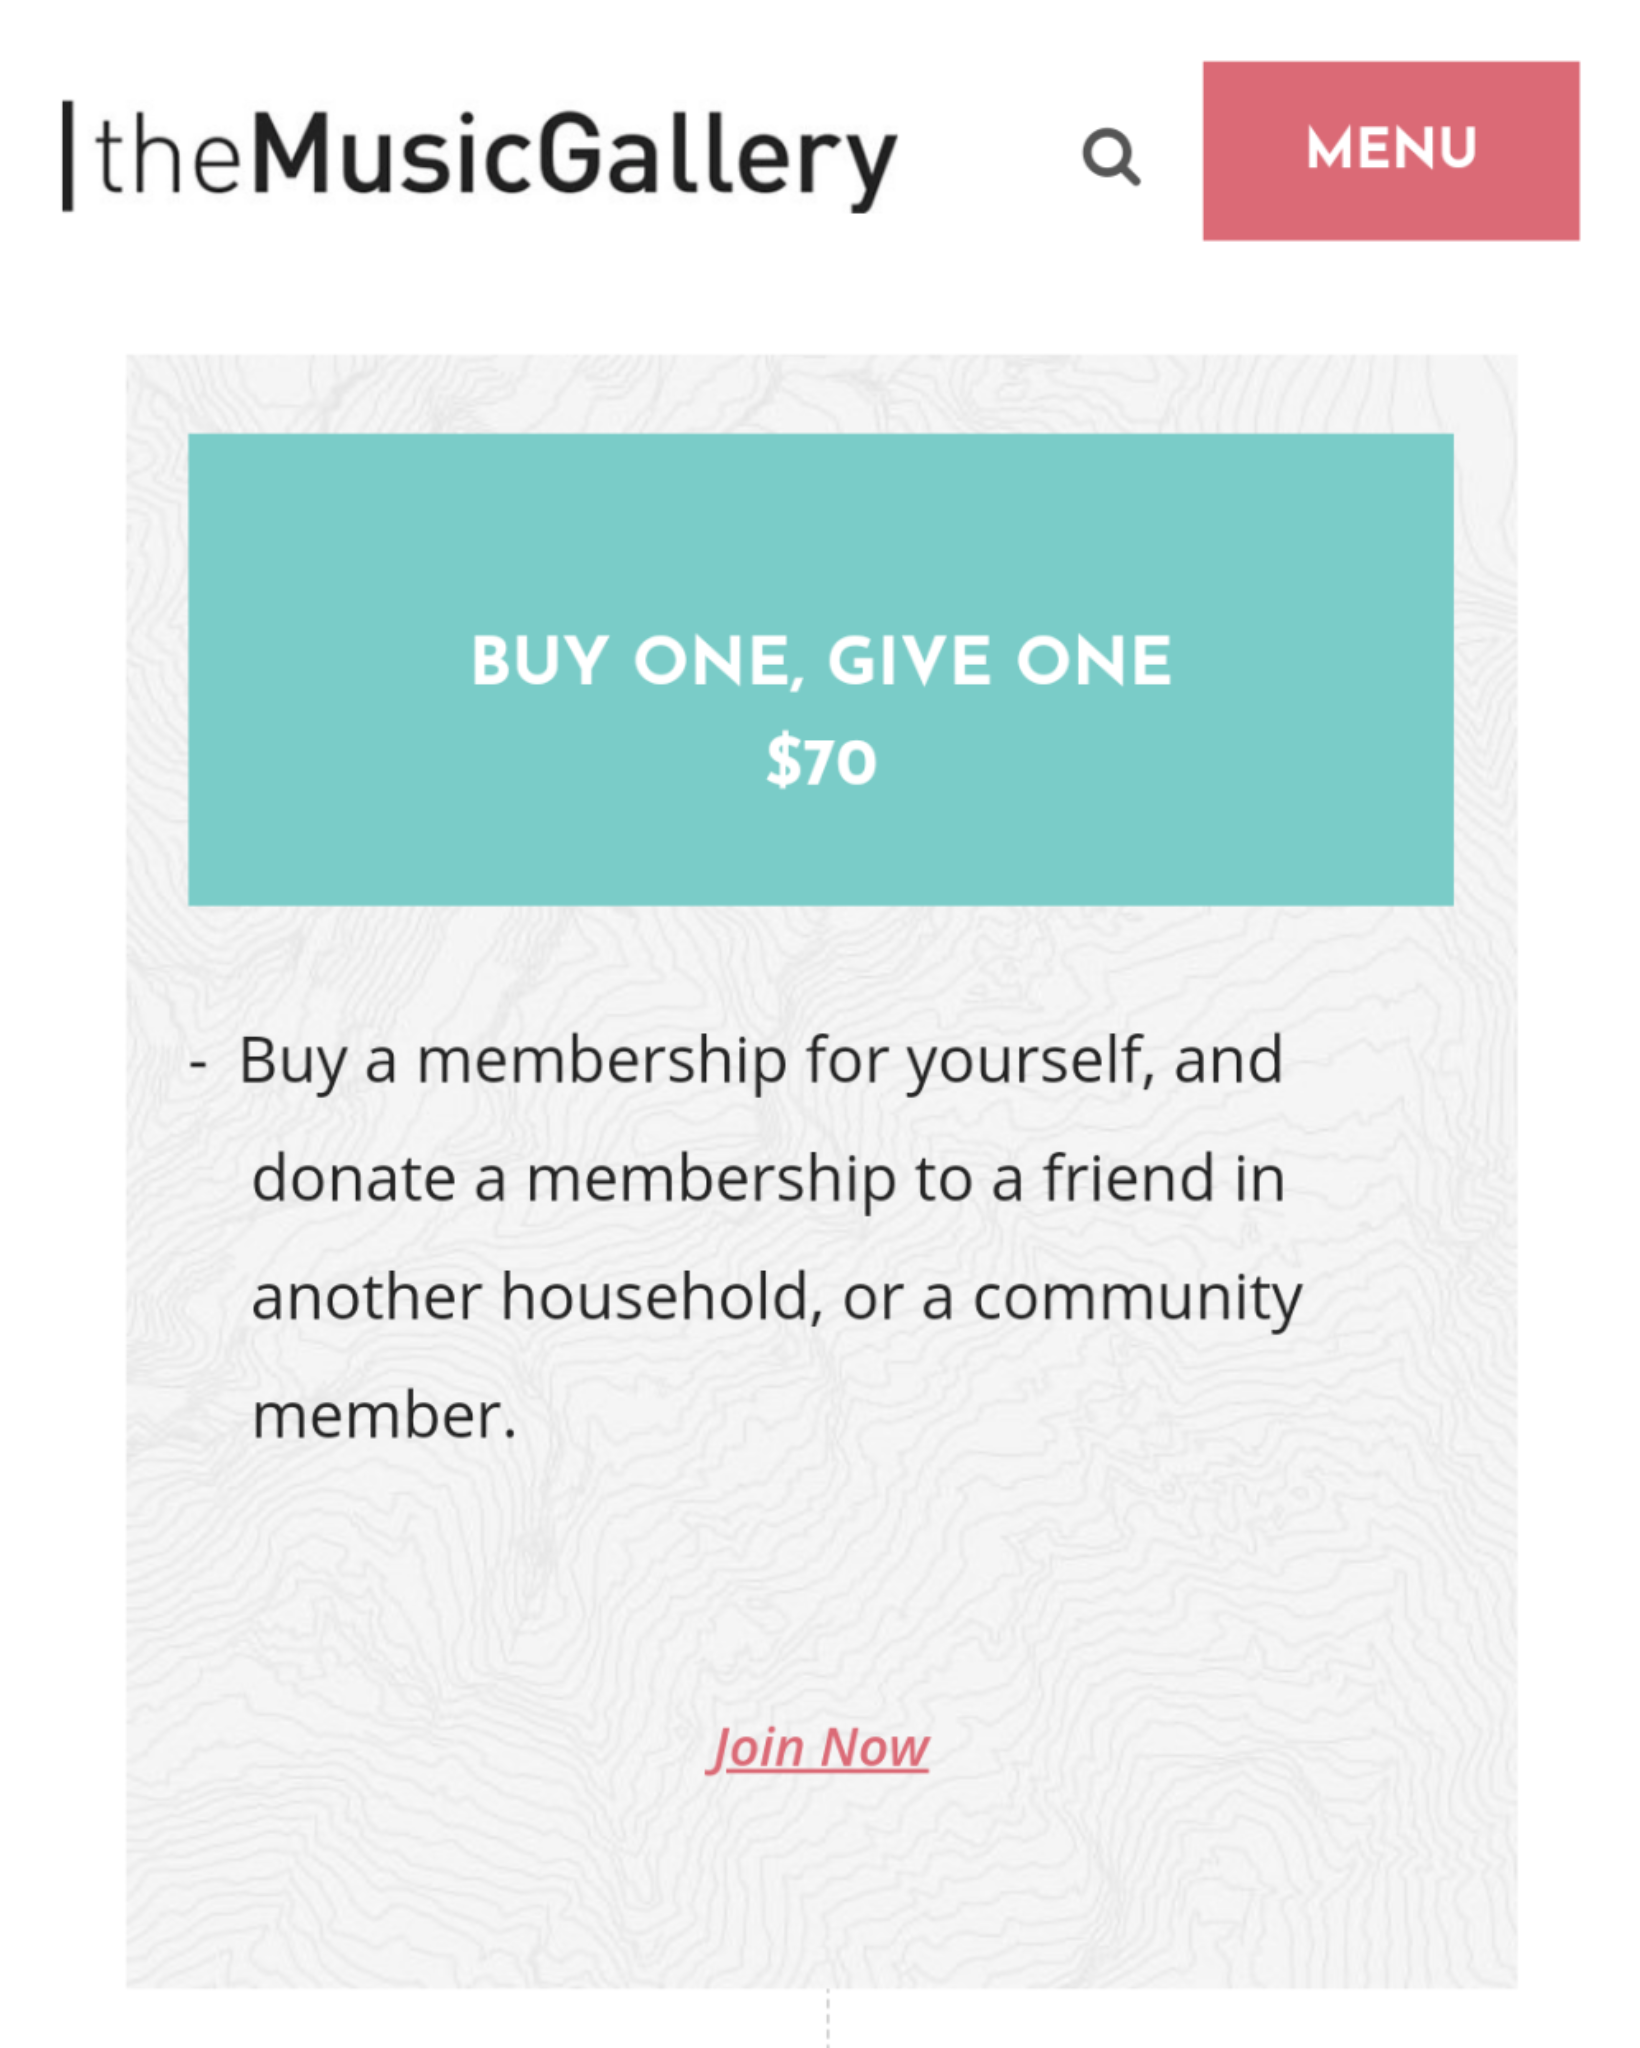 the Music Gallery website offering a buy one, give one membership deal for $70. 